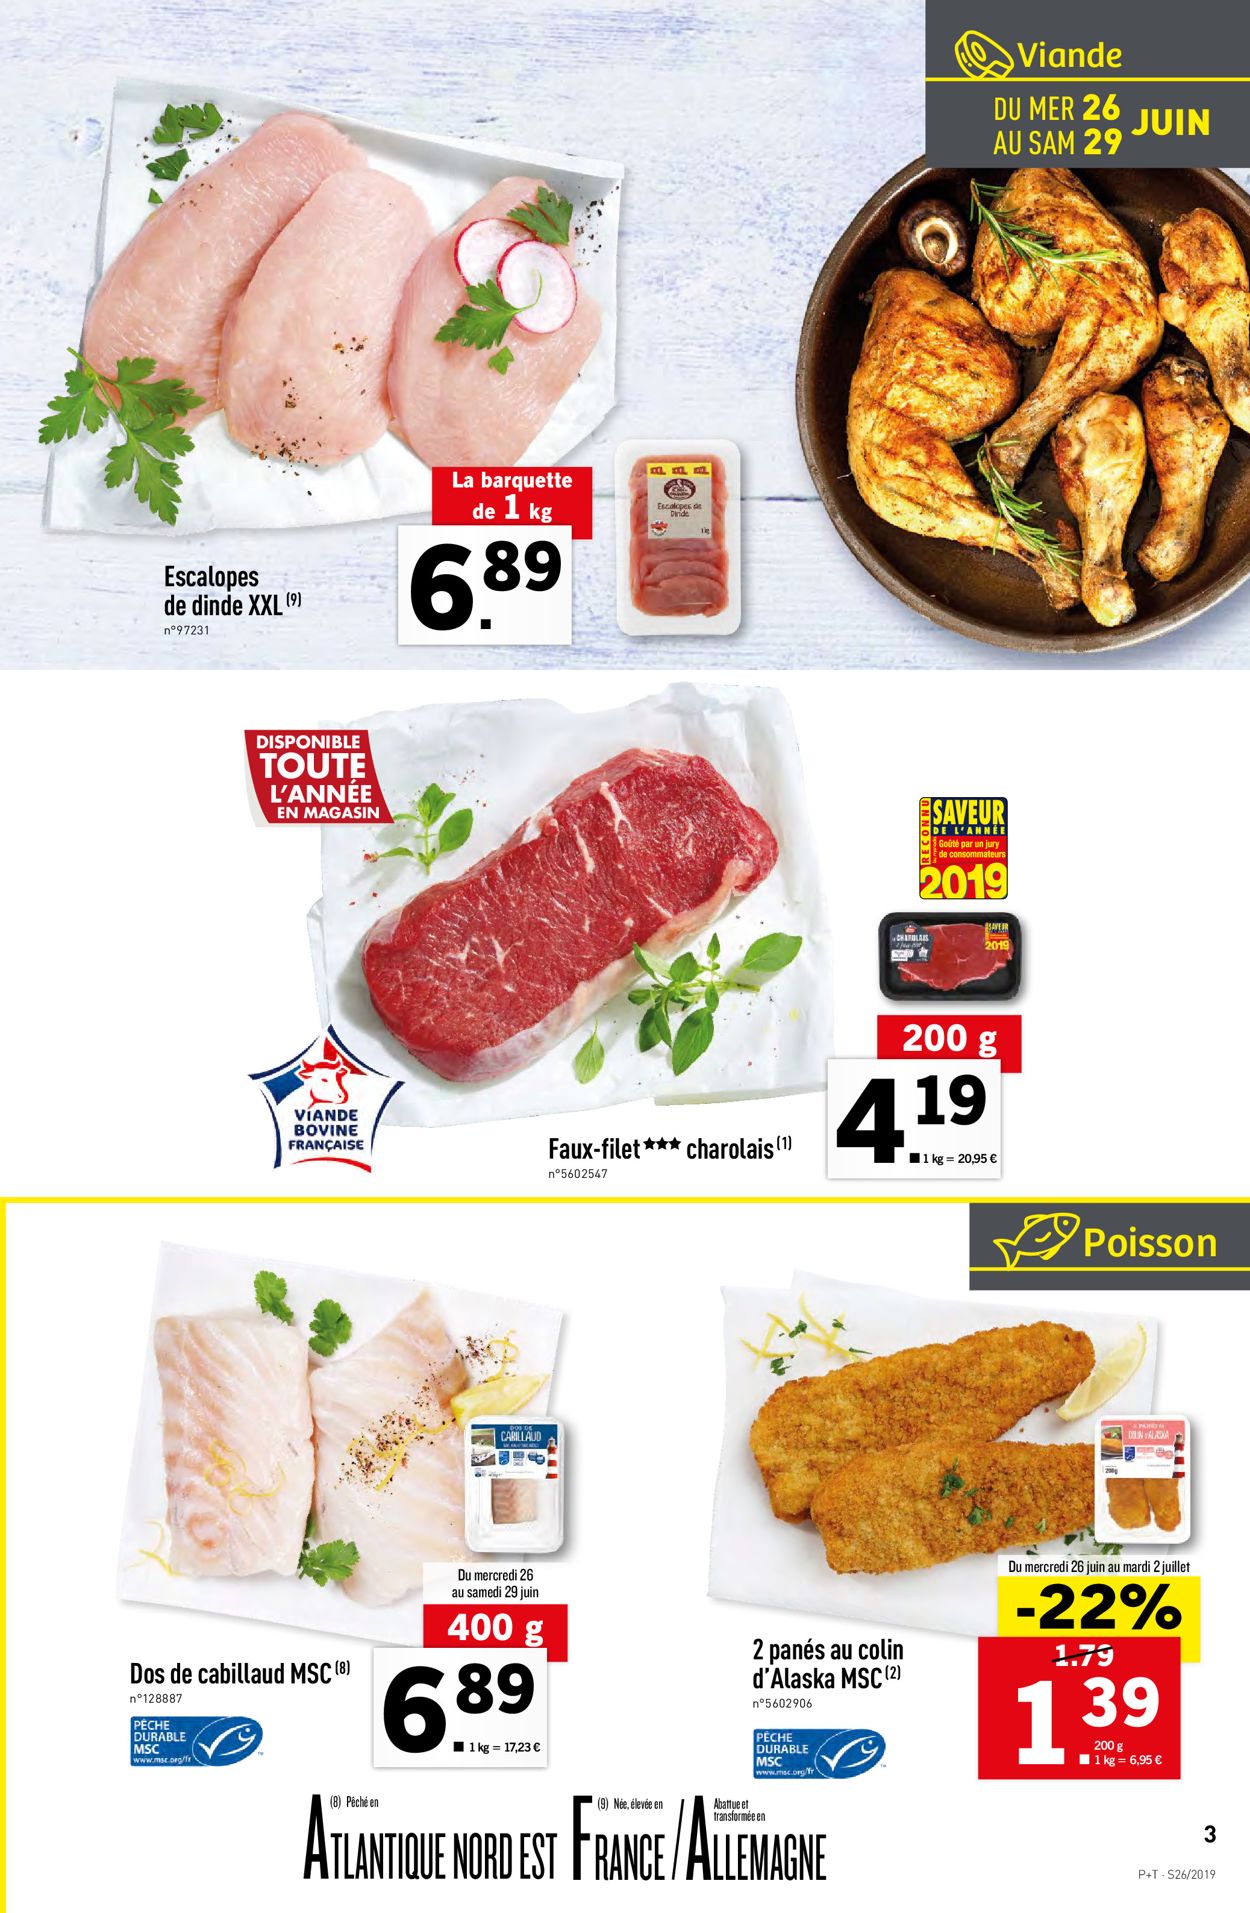 Lidl Catalogue - 26.06-02.07.2019 (Page 3)